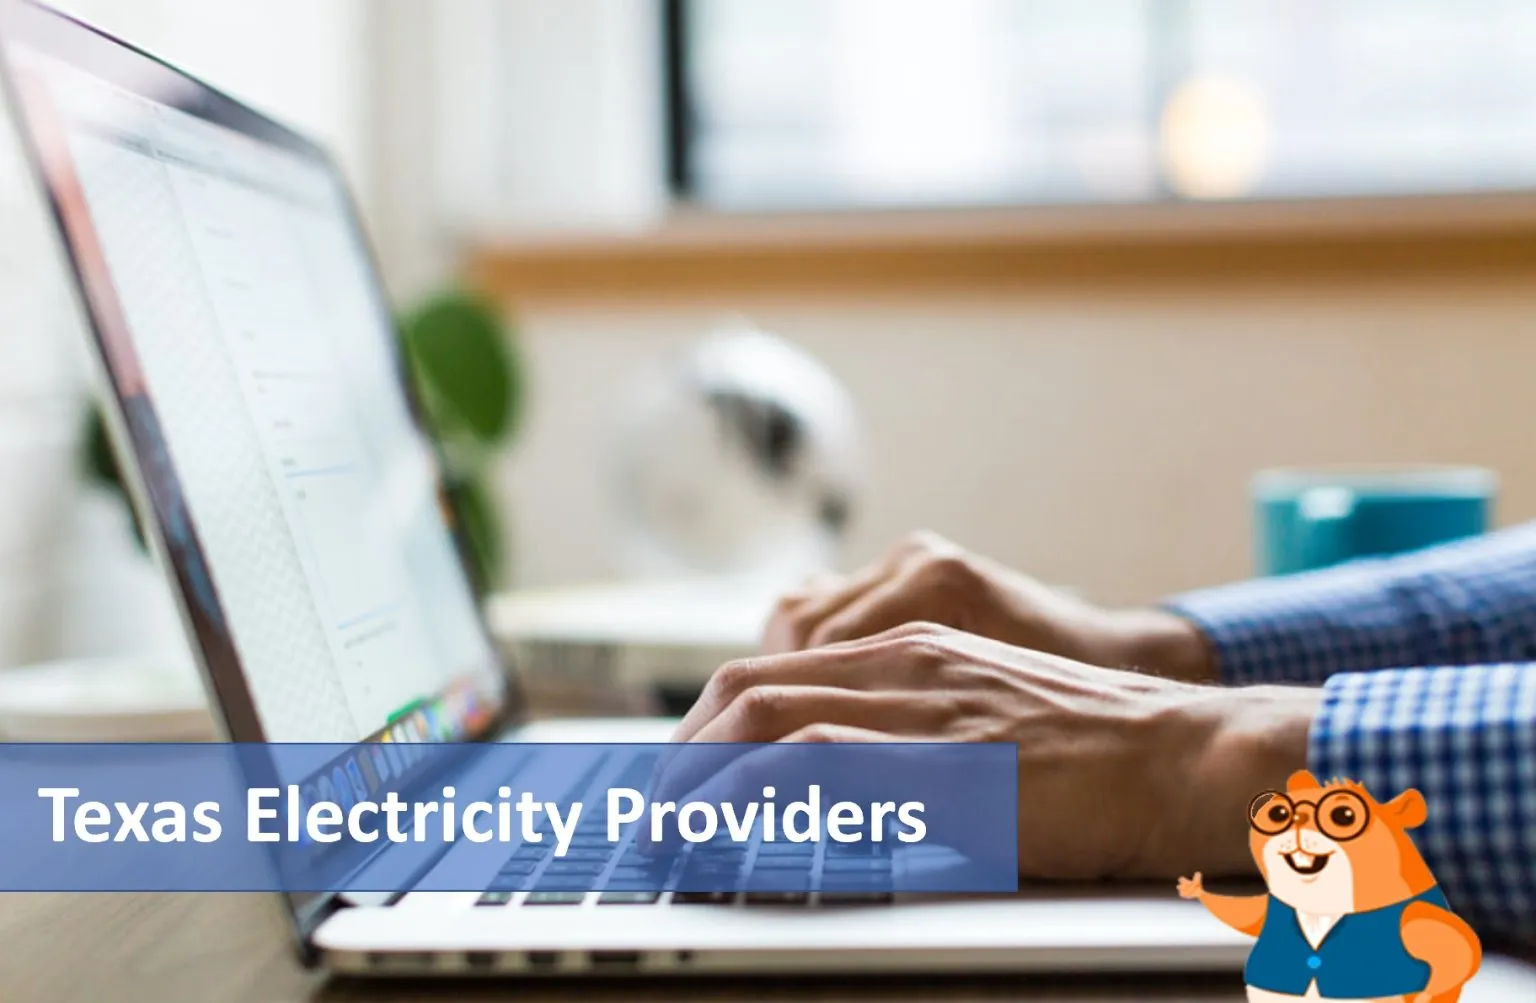 Texas Electricity Providers